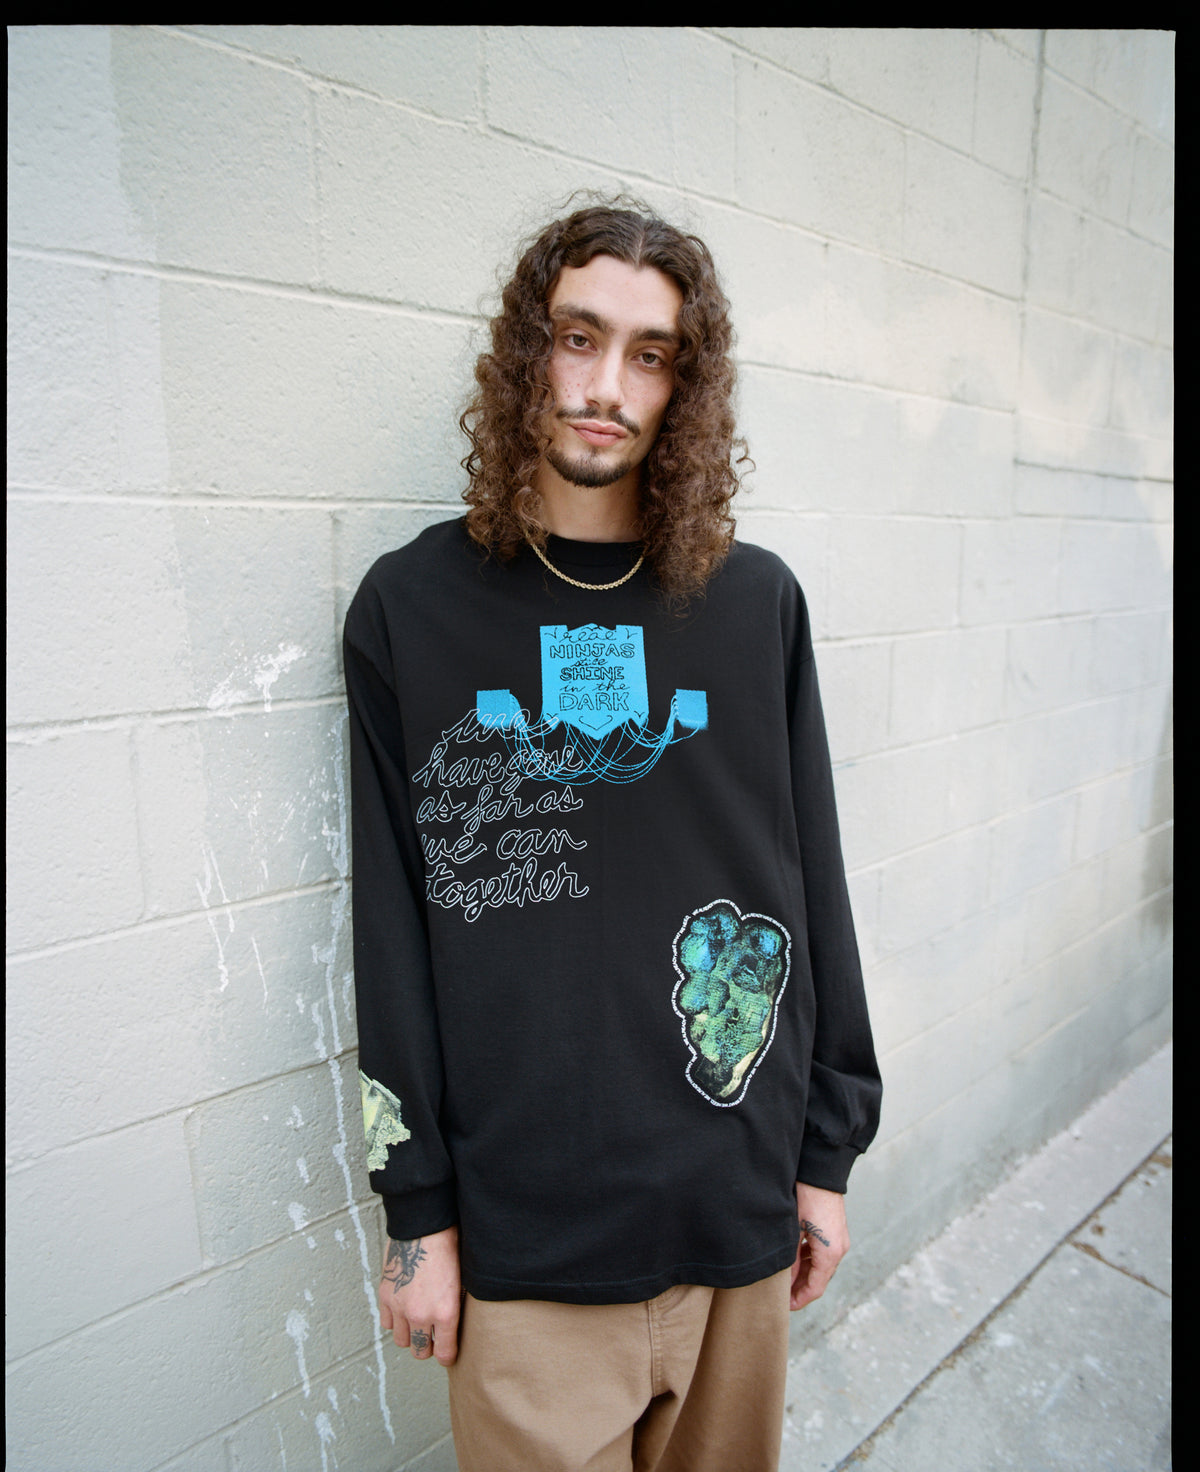 WE HAVE GONE AS FAR AS WE CAN TOGETHER - L/S TEE - BLACK